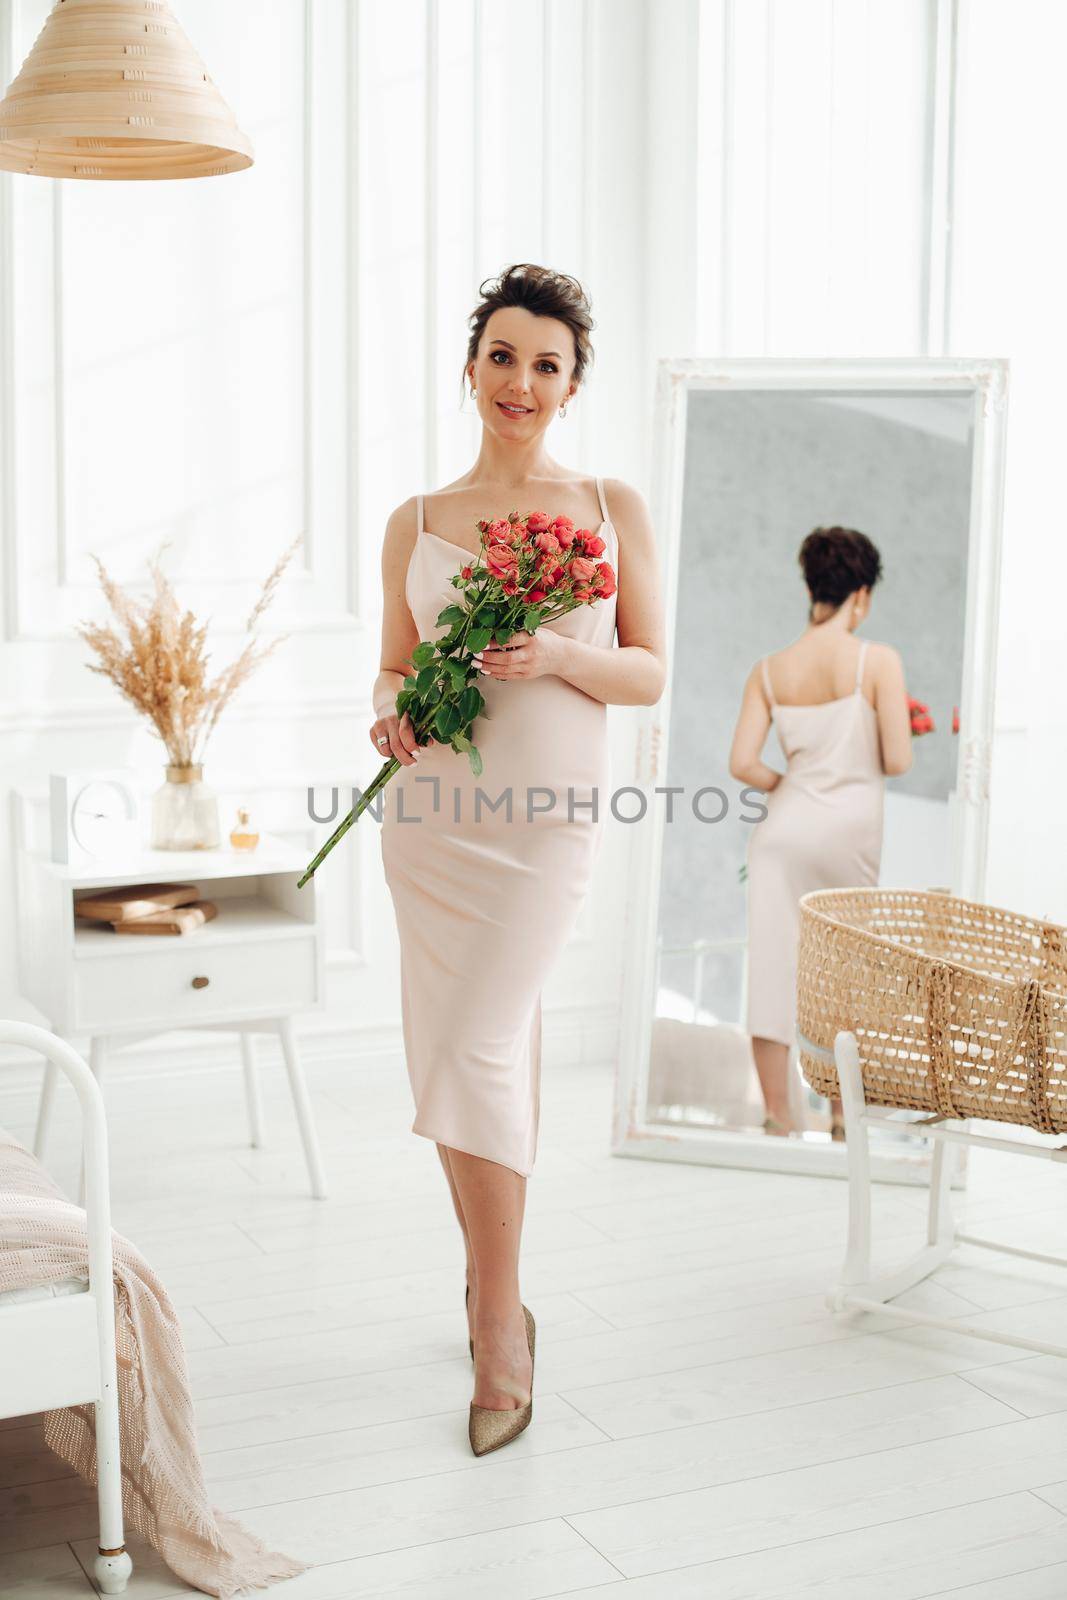 Full length portrait of pregnant gorgeous dark-haired Caucasian woman in beige silk dress and heels holding bouquet of red roses and smiling at camera. Mirror reflection of her in the background.